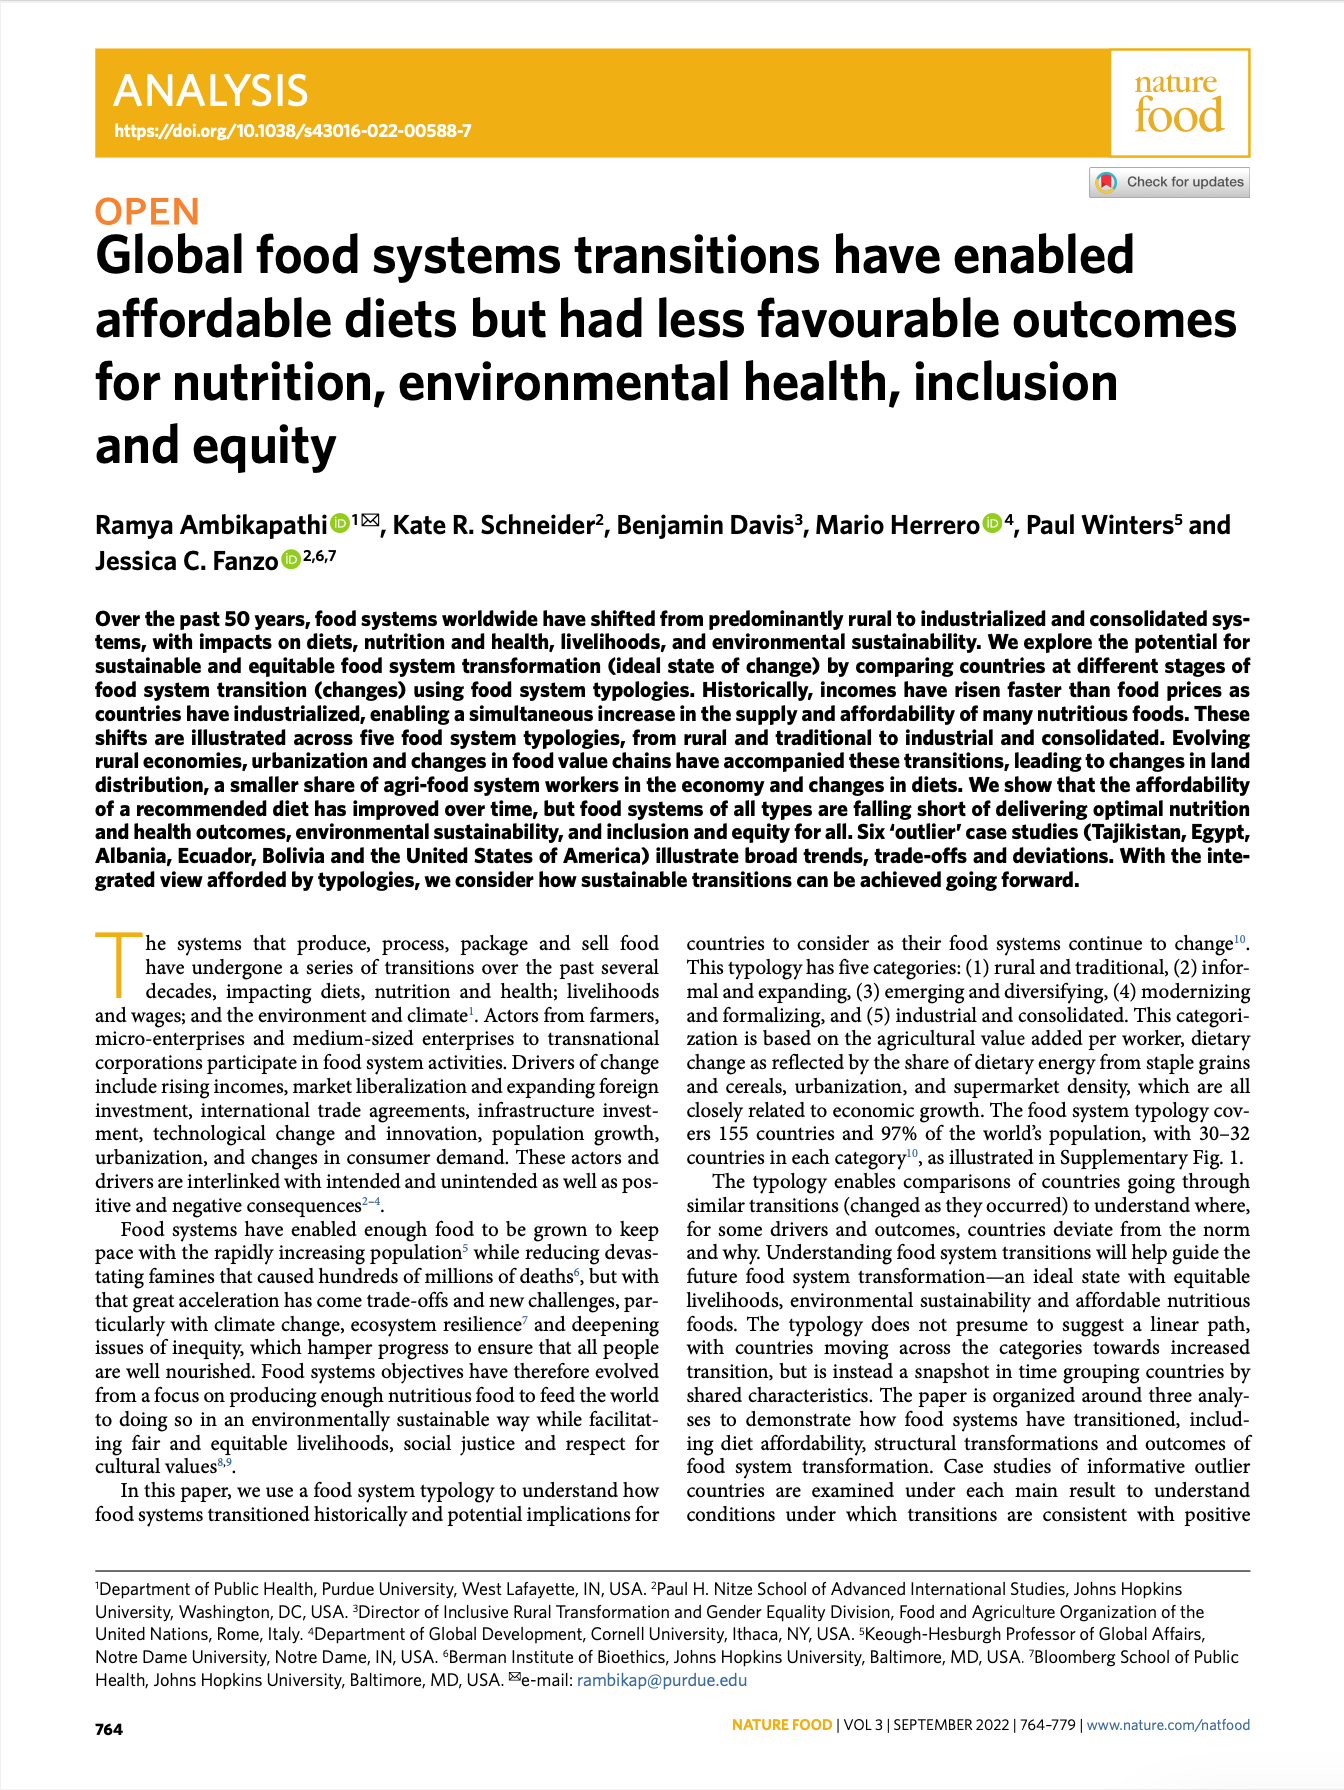 Global food systems transitions have enabled affordable diets but had less favourable outcomes for nutrition, environmental health, inclusion and equity